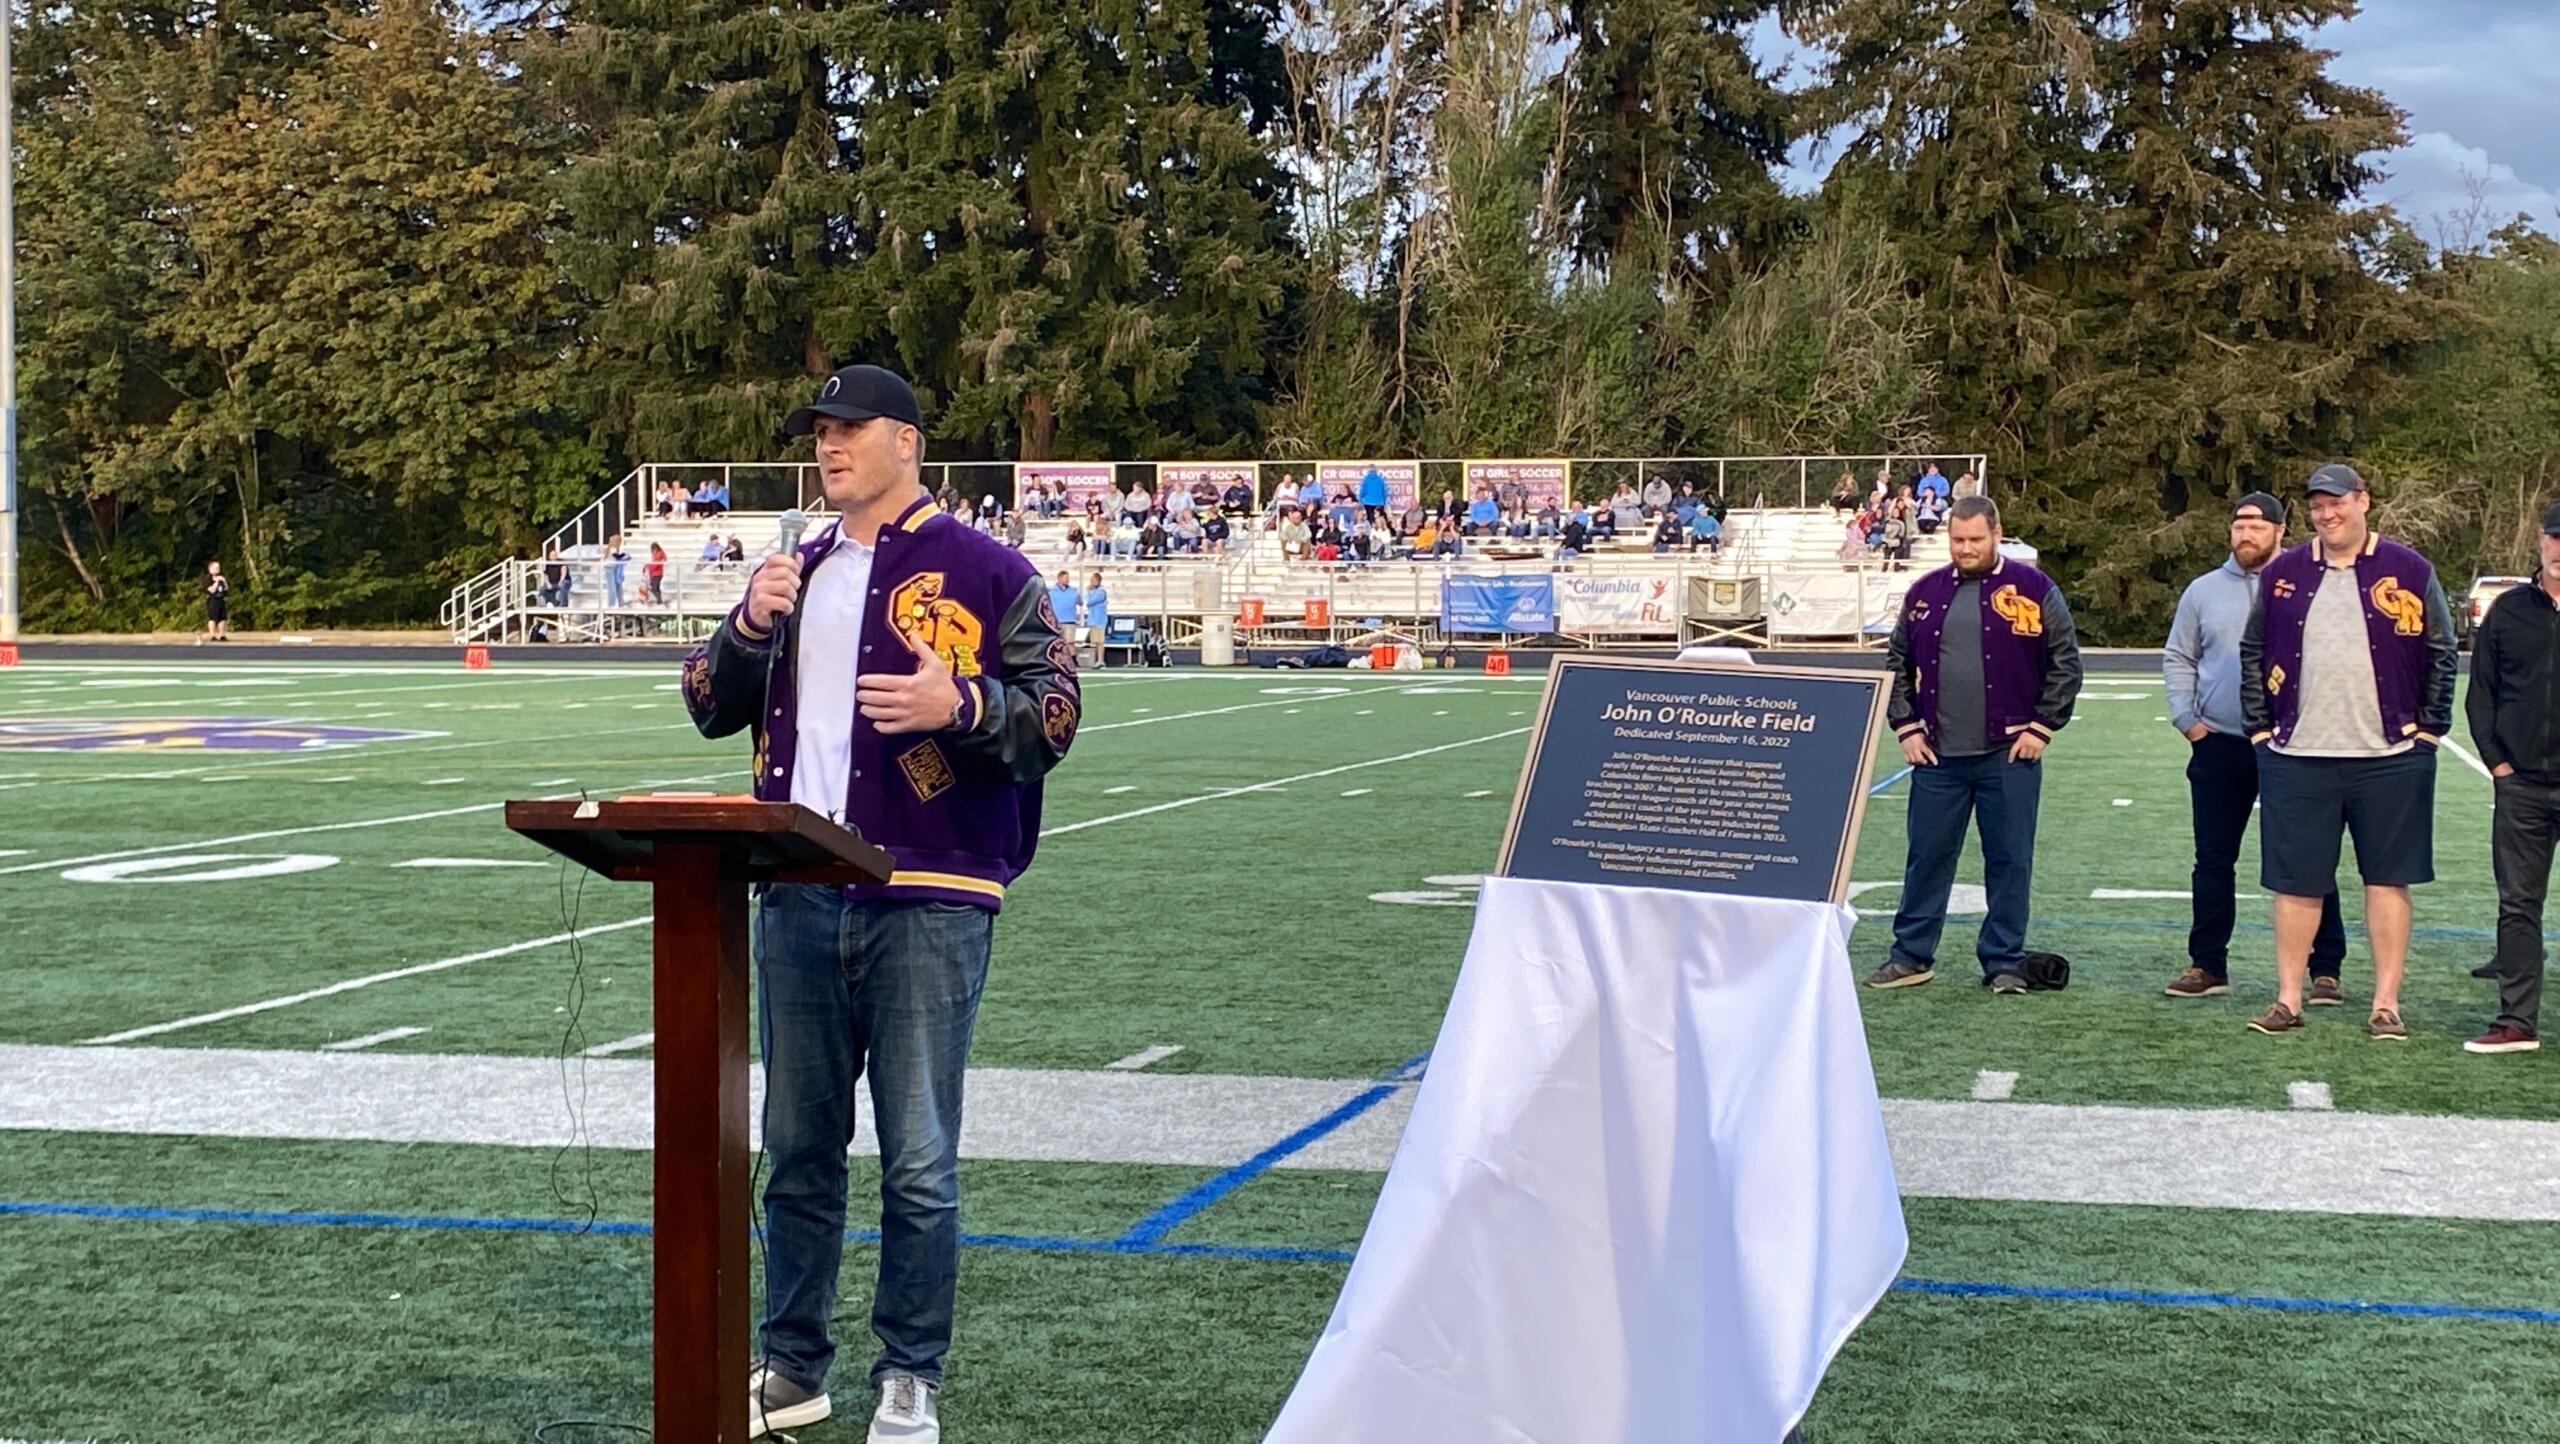 Brett Pierce, a 1999 River graduate who played football at Stanford and the NFL, addresses the crowd during Friday's pregame ceremony.